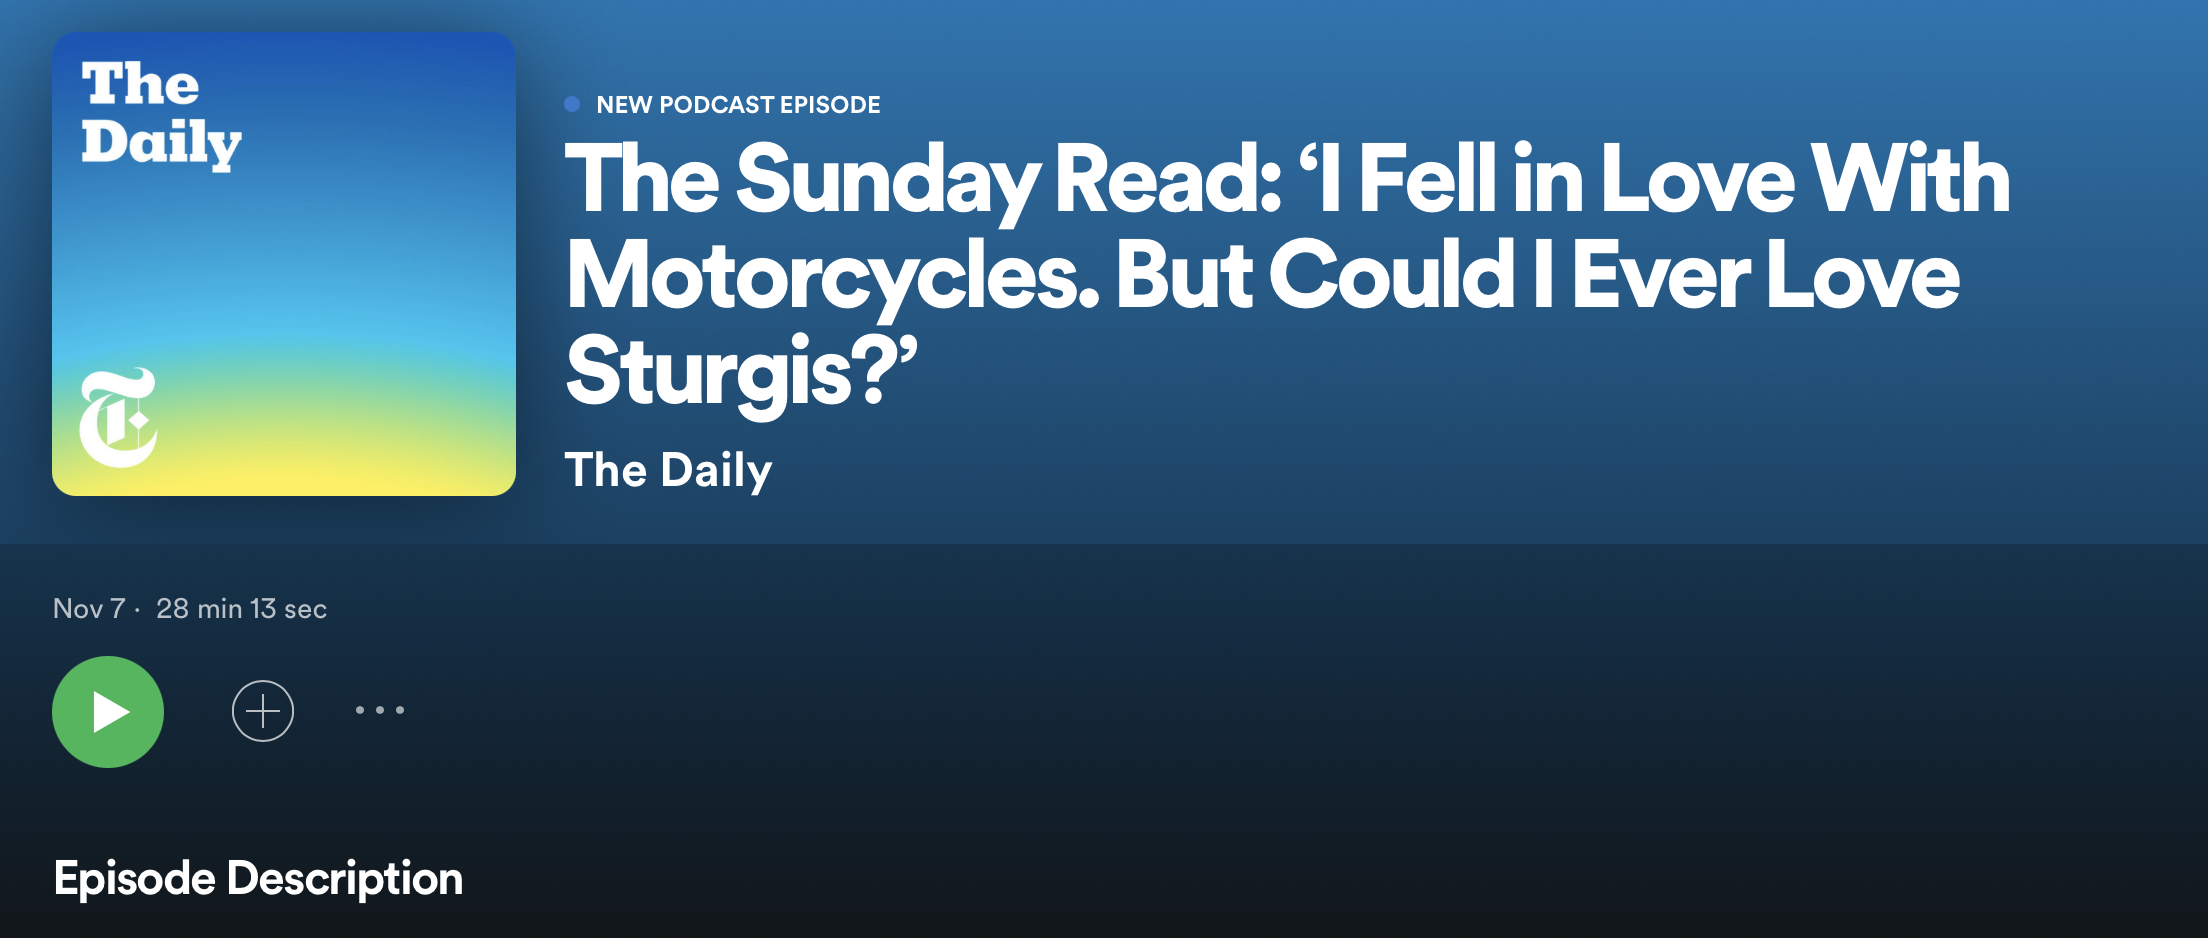 I Fell in Love With Motorcycles. But Could I Ever Love Sturgis? The Daily Podcast